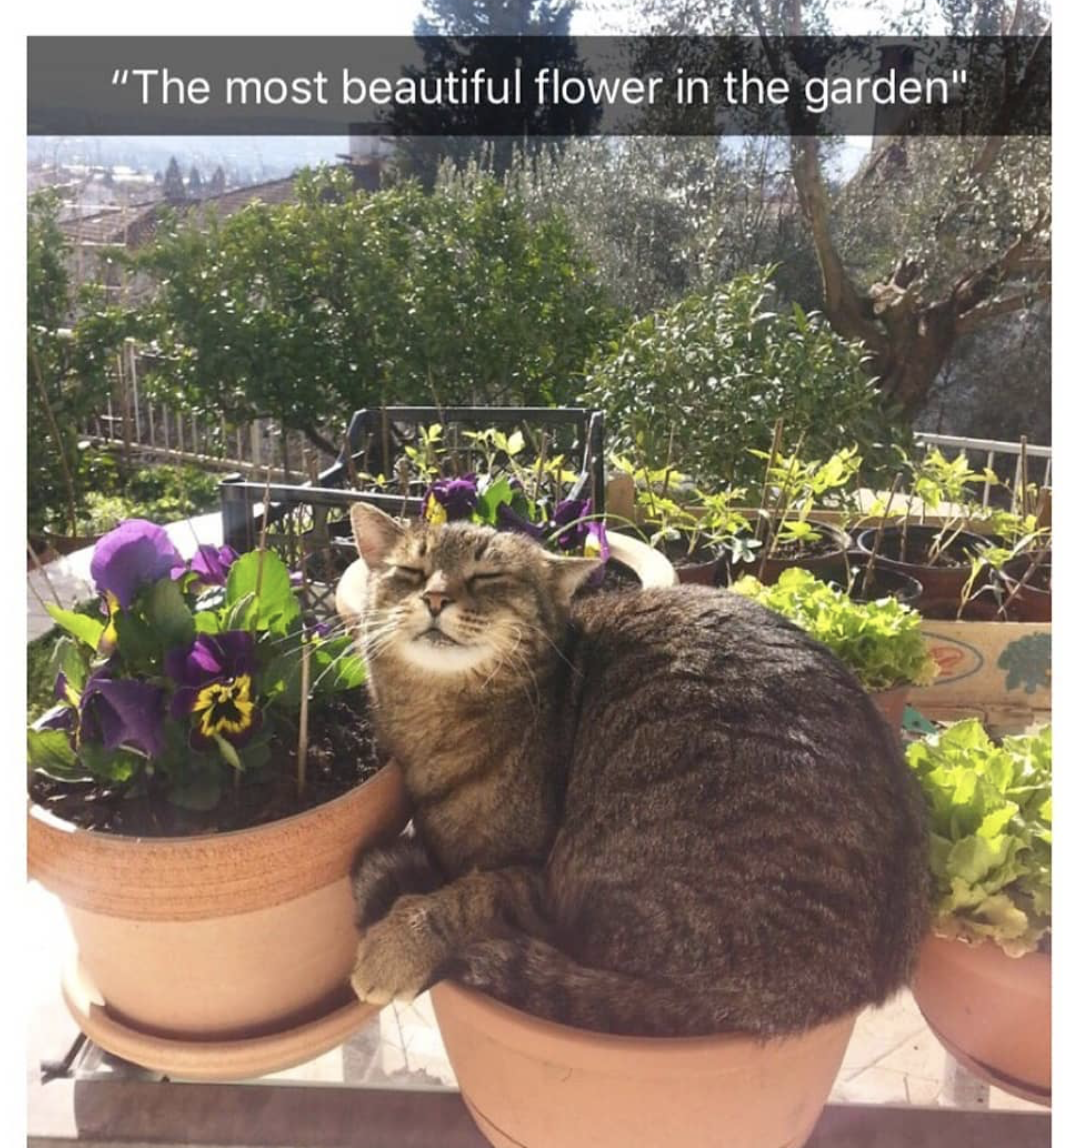 most beautiful flower in the garden cat - "The most beautiful flower in the garden"